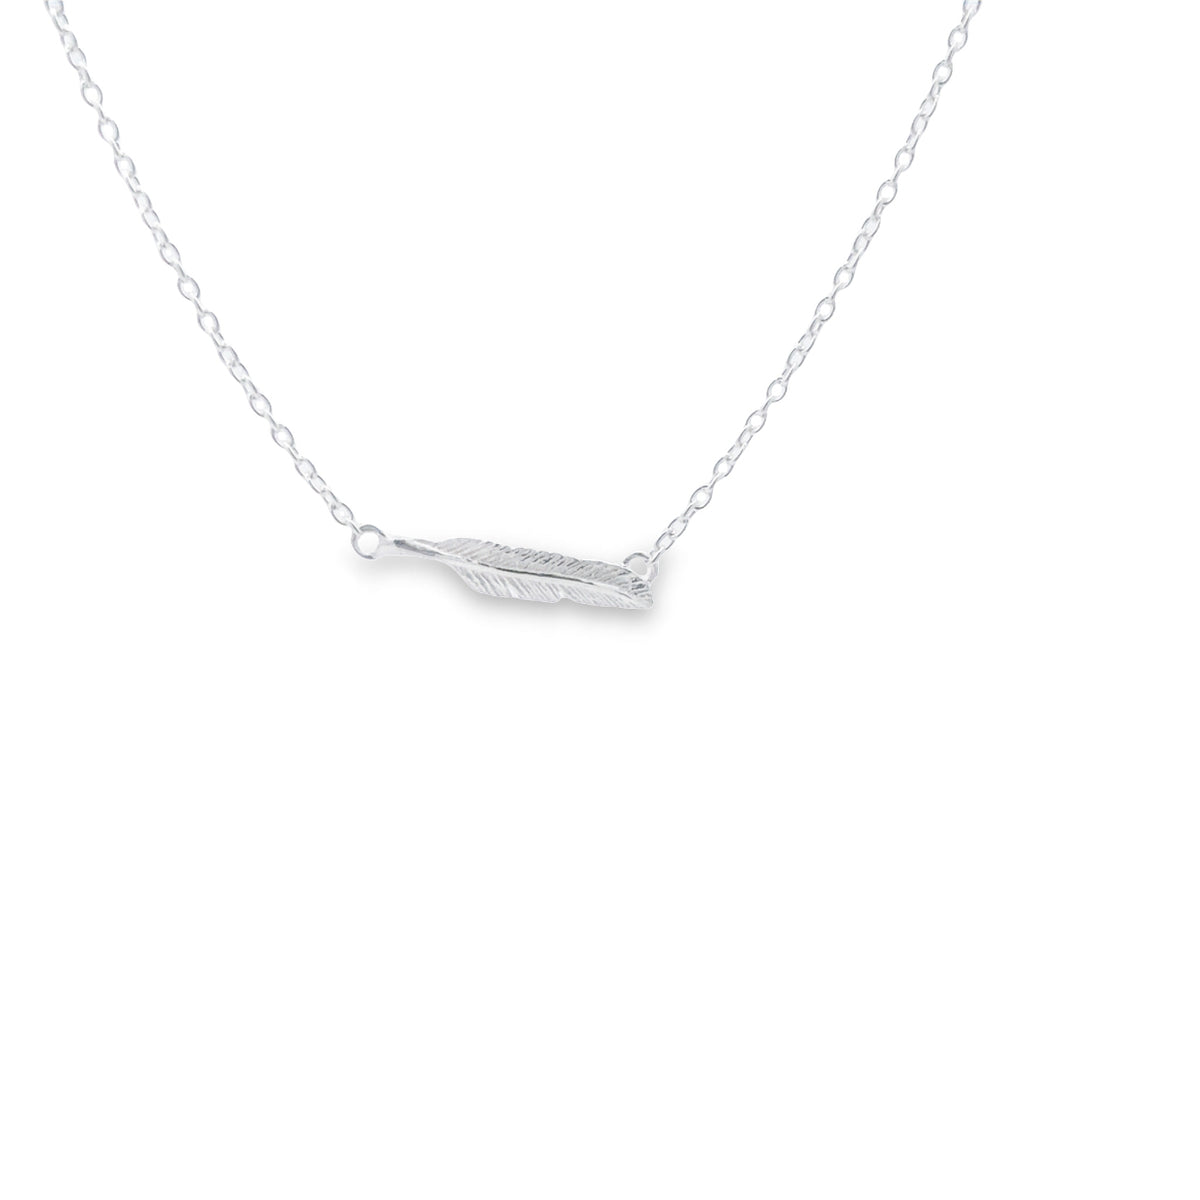 Onatah Sterling Silver Feather Necklace